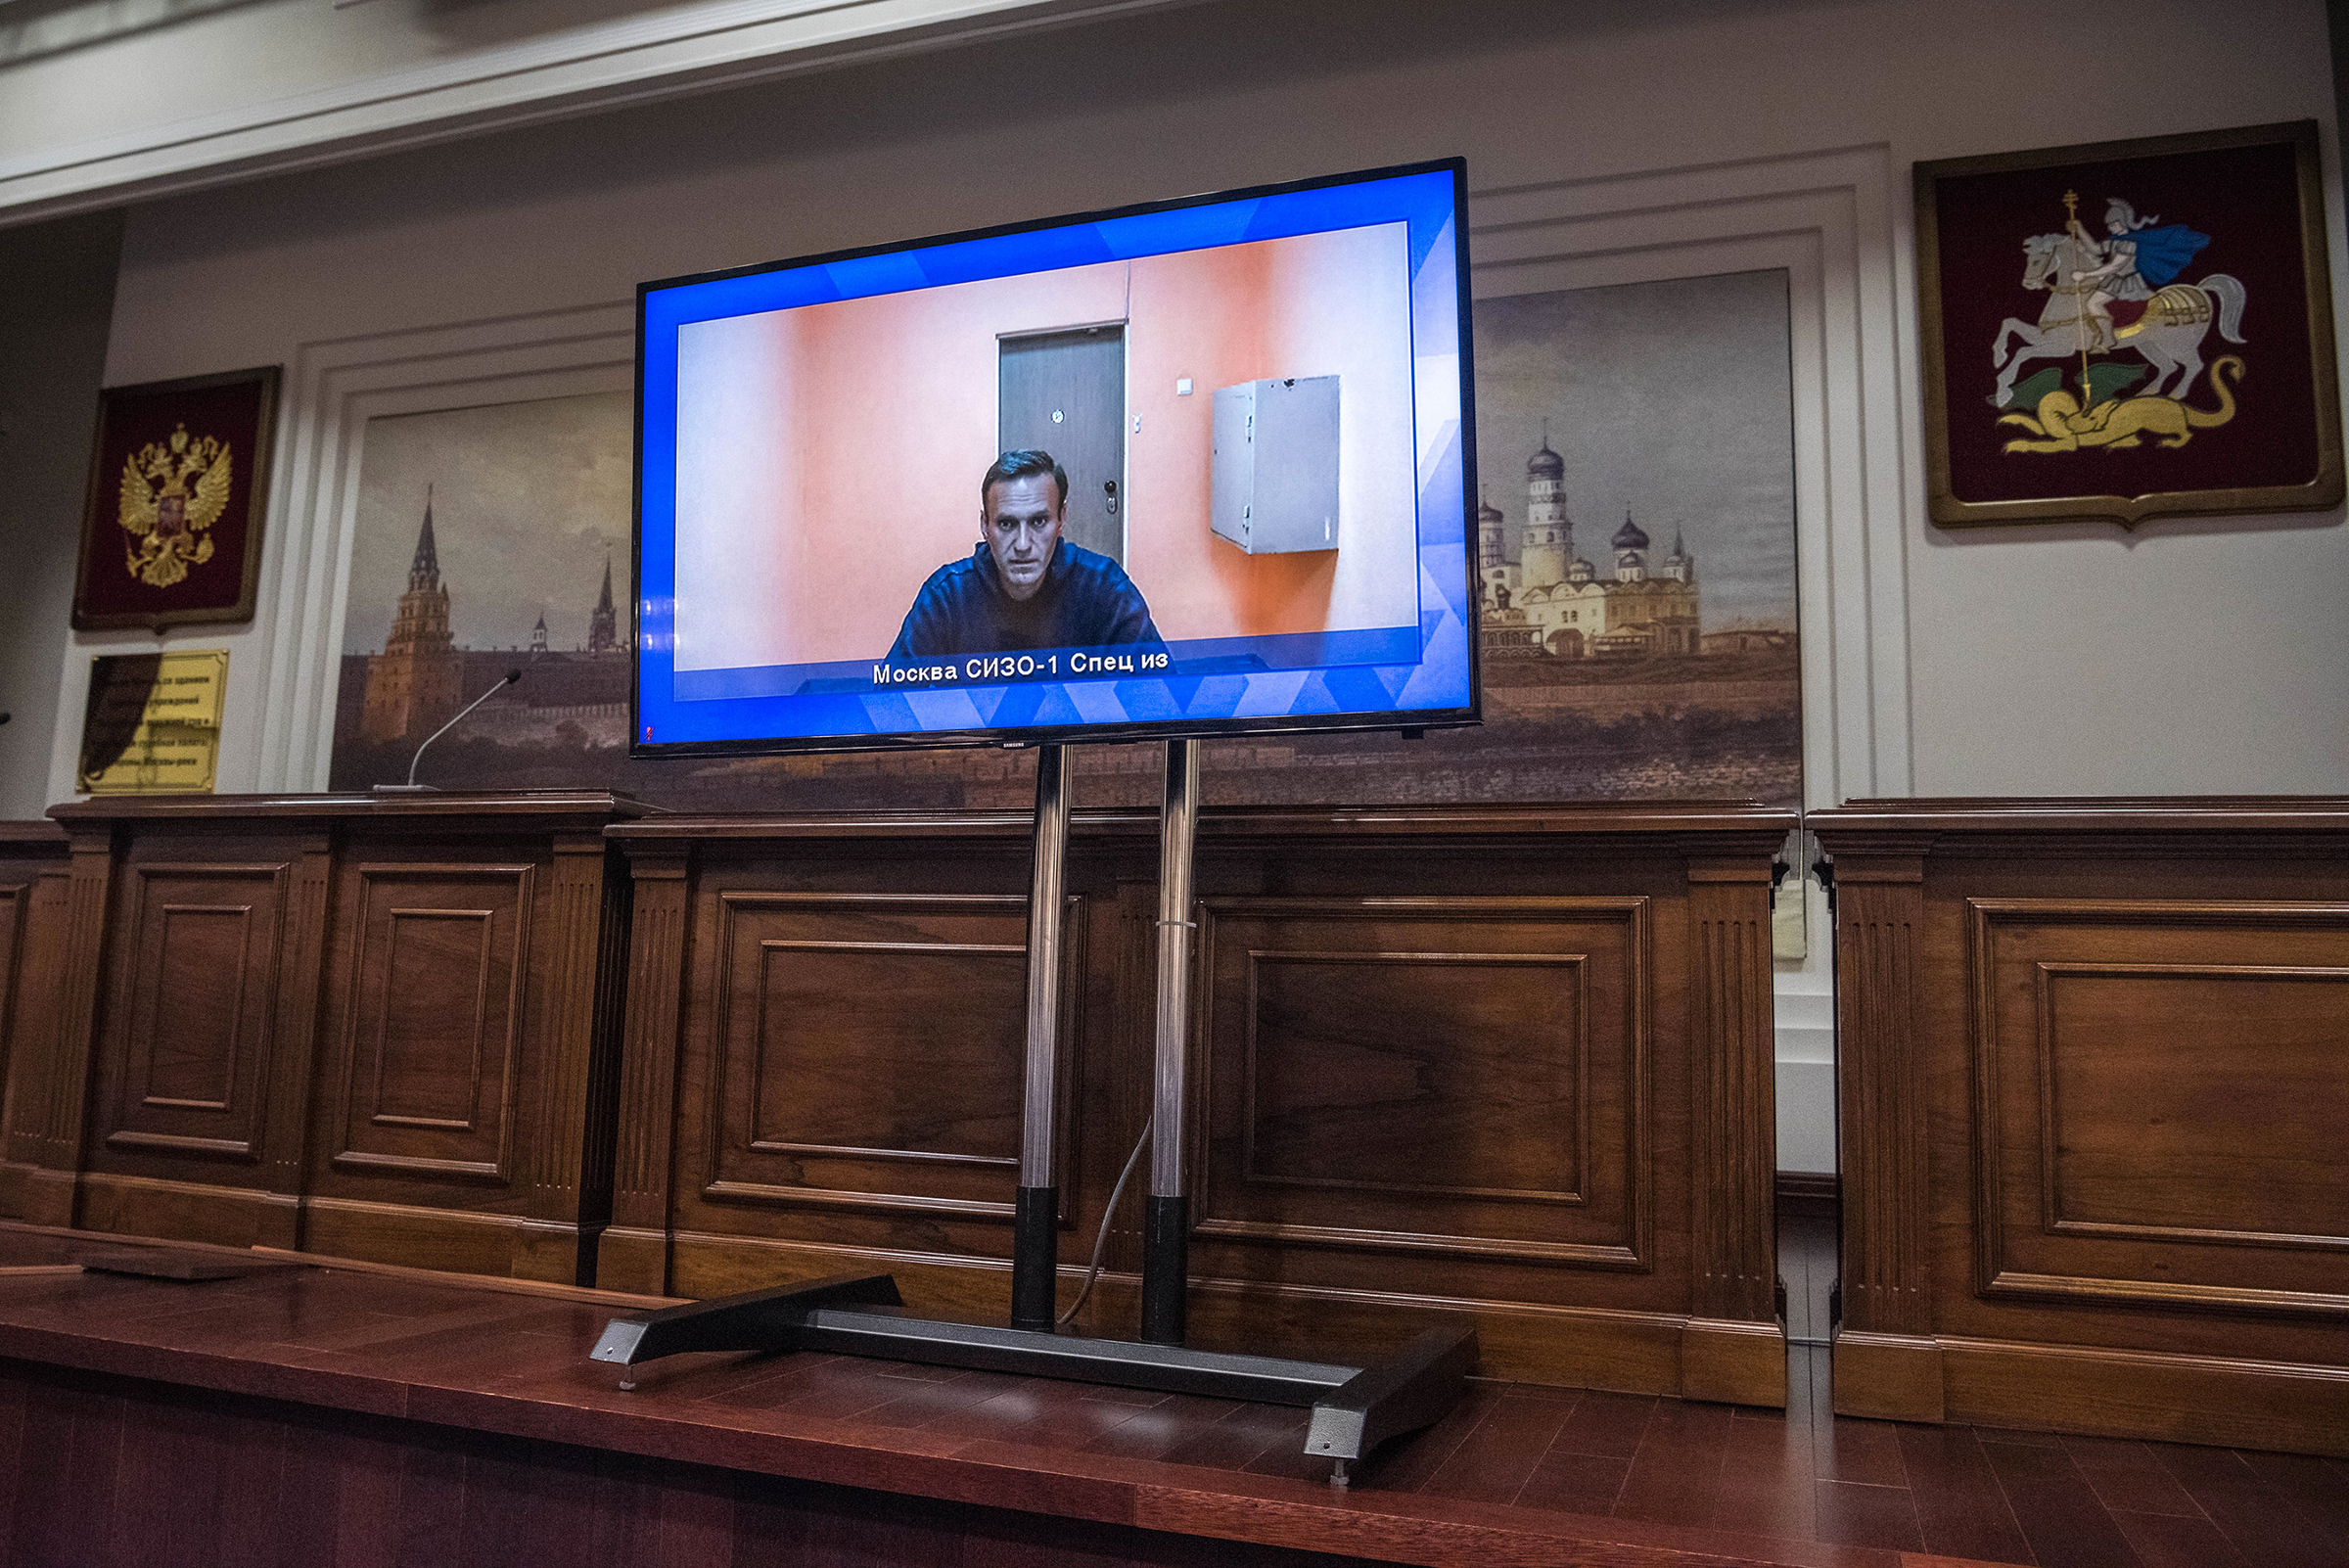 Russian opposition leader Alexei Navalny appears via video link for a court hearing, in which it was directed that he remain imprisoned, in Moscow on Jan. 28, 2021.